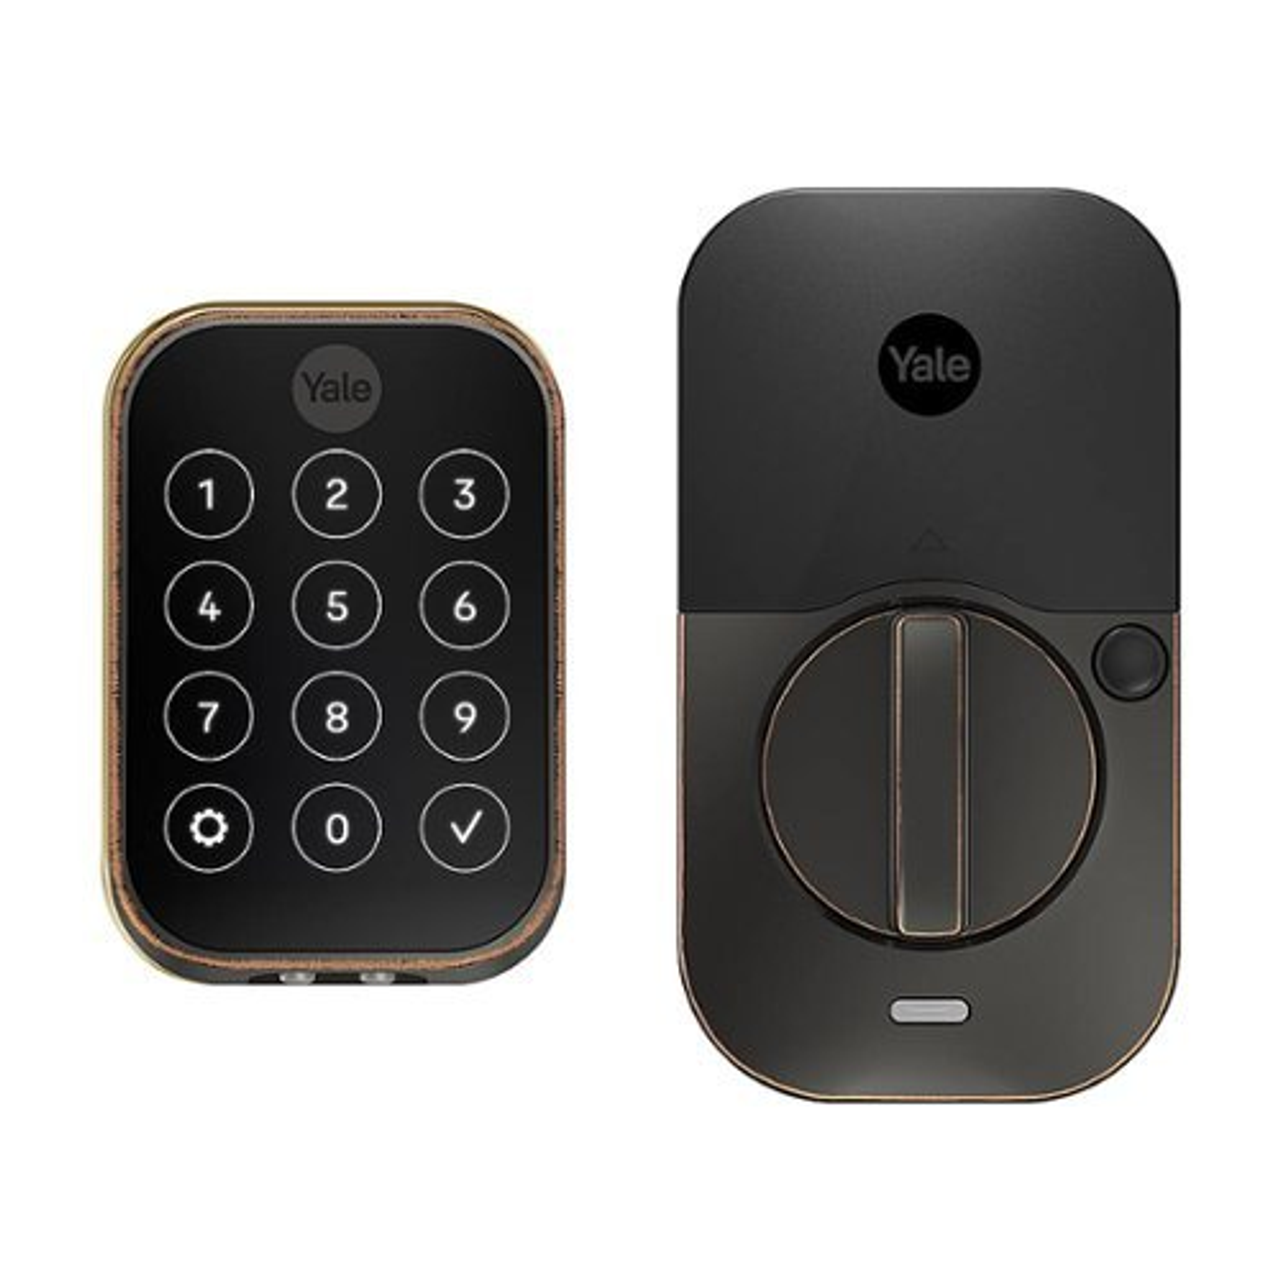 Yale - Assure Lock 2 Plus Smart Lock Bluetooth Replacement with Home Keys, Electronic Guest Keys, and Keypad Access - Oil Rubbed Bronze